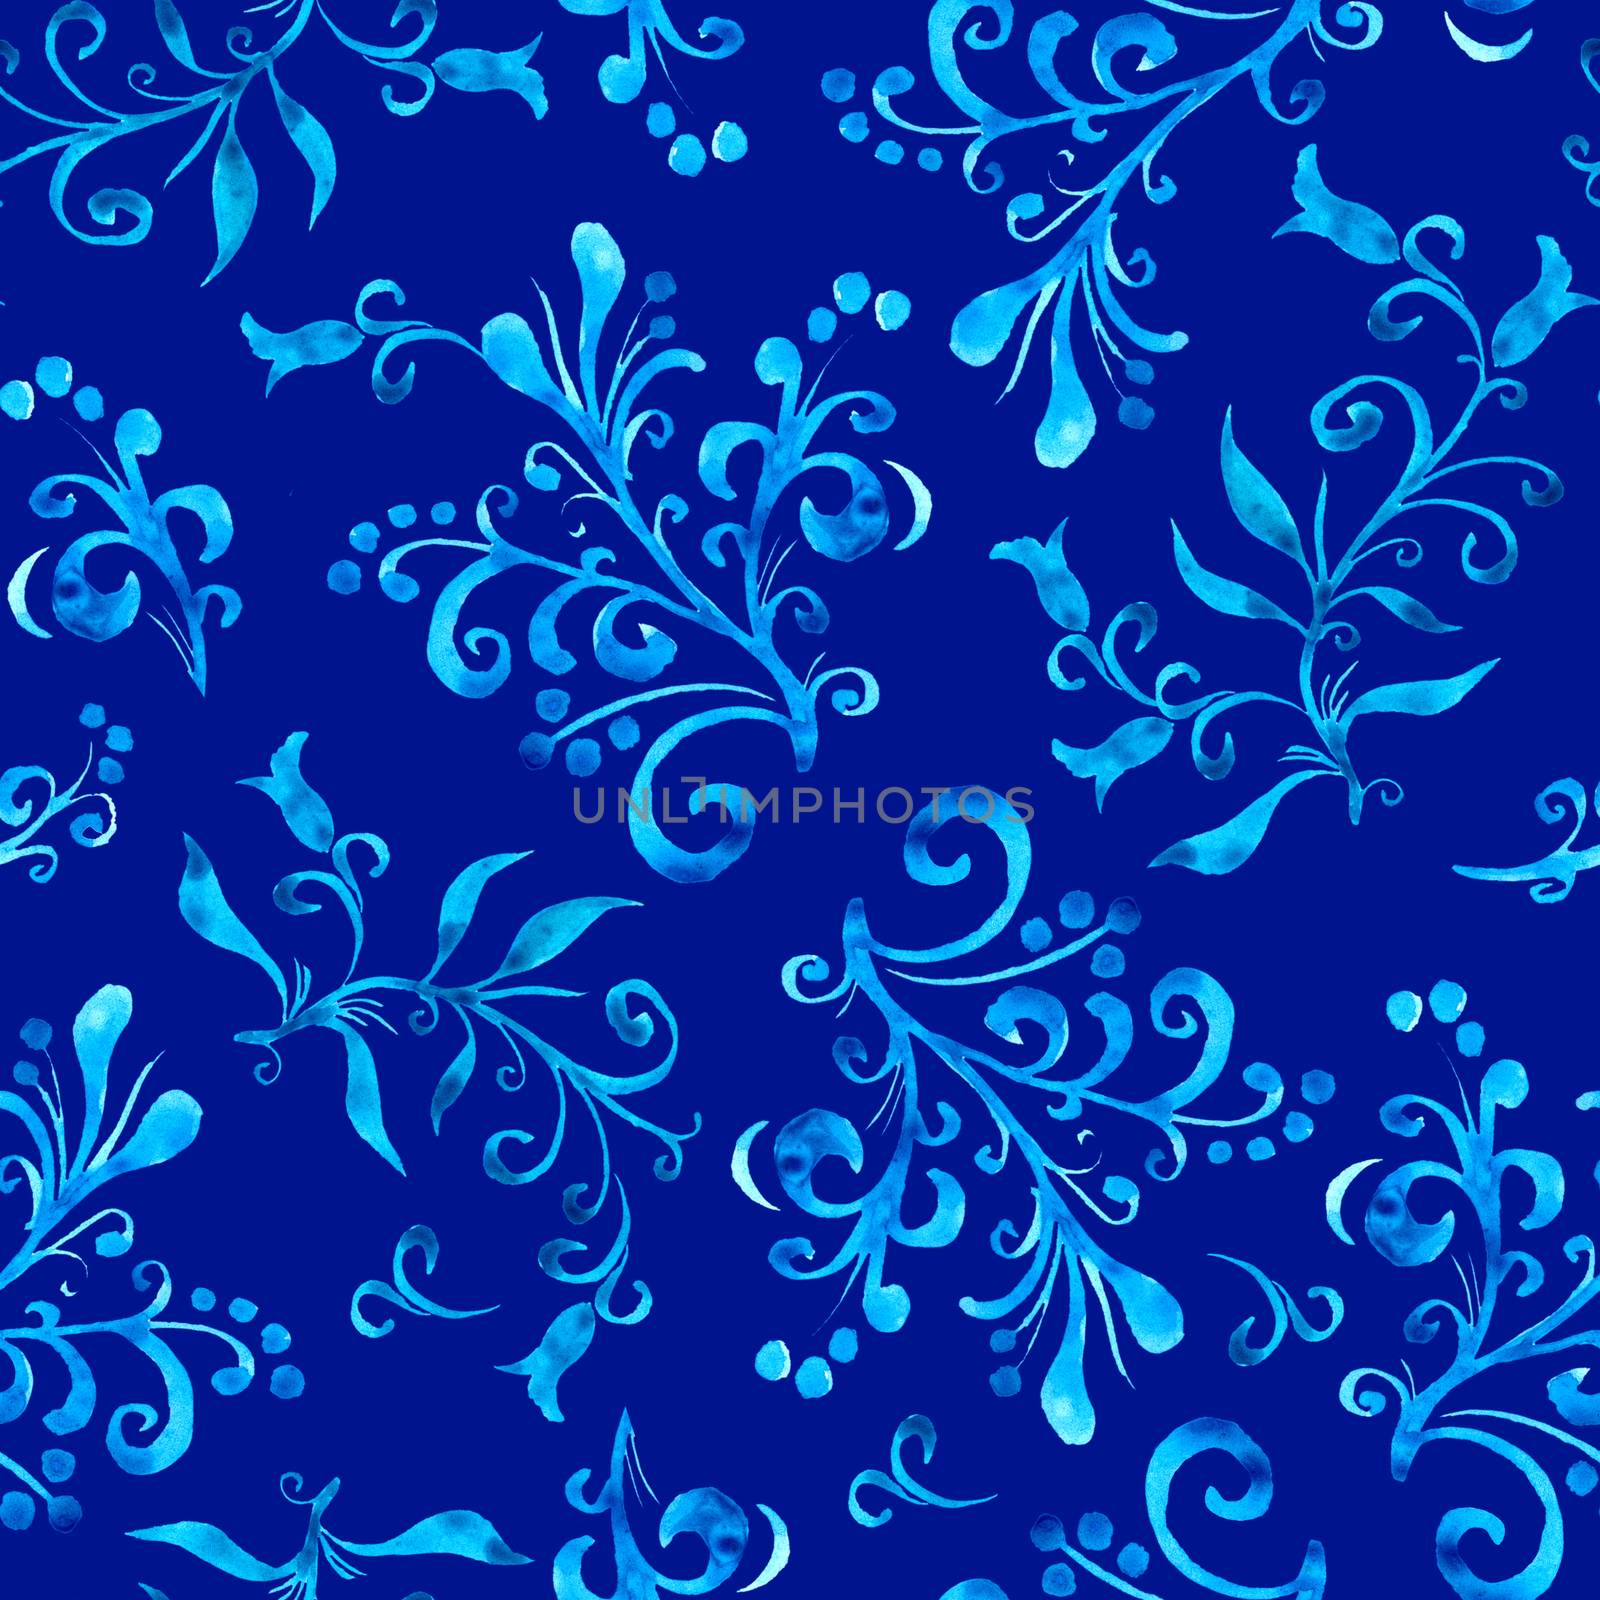 Floral seamless pattern with leaves and berries in blue color on indigo background. Hand drawing. Background for title, blog, decoration. Design for wrappers, textiles, fabrics.